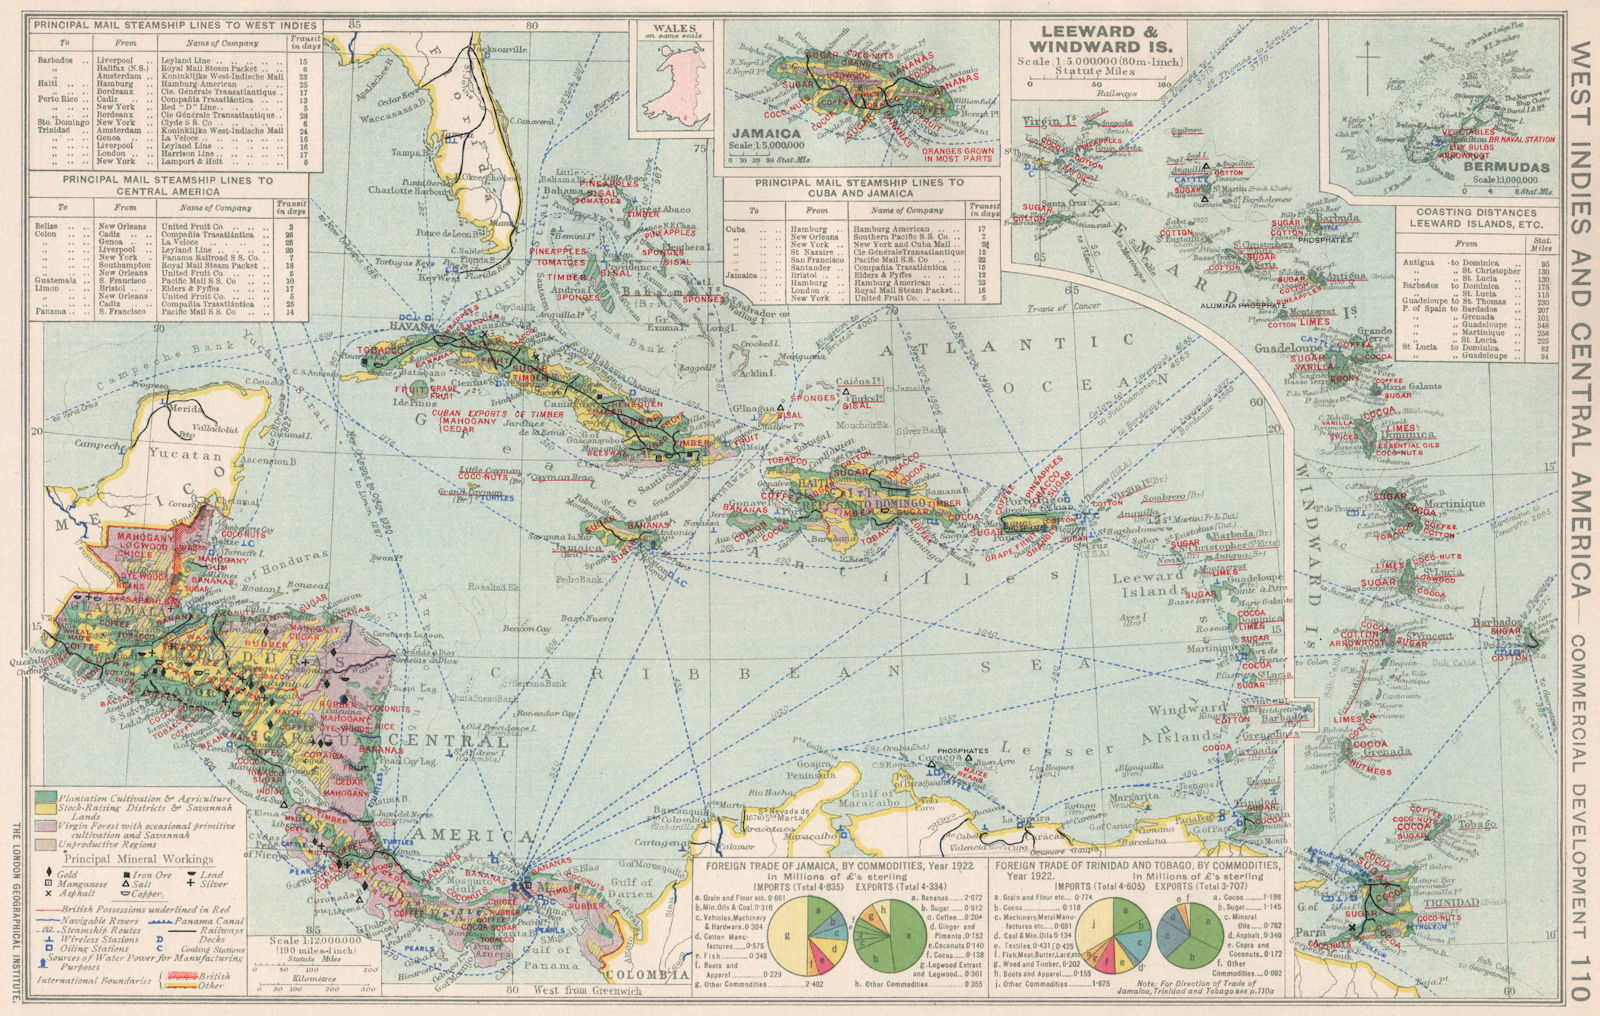 West Indies & Central America. Commercial. Agricultural products 1925 old map